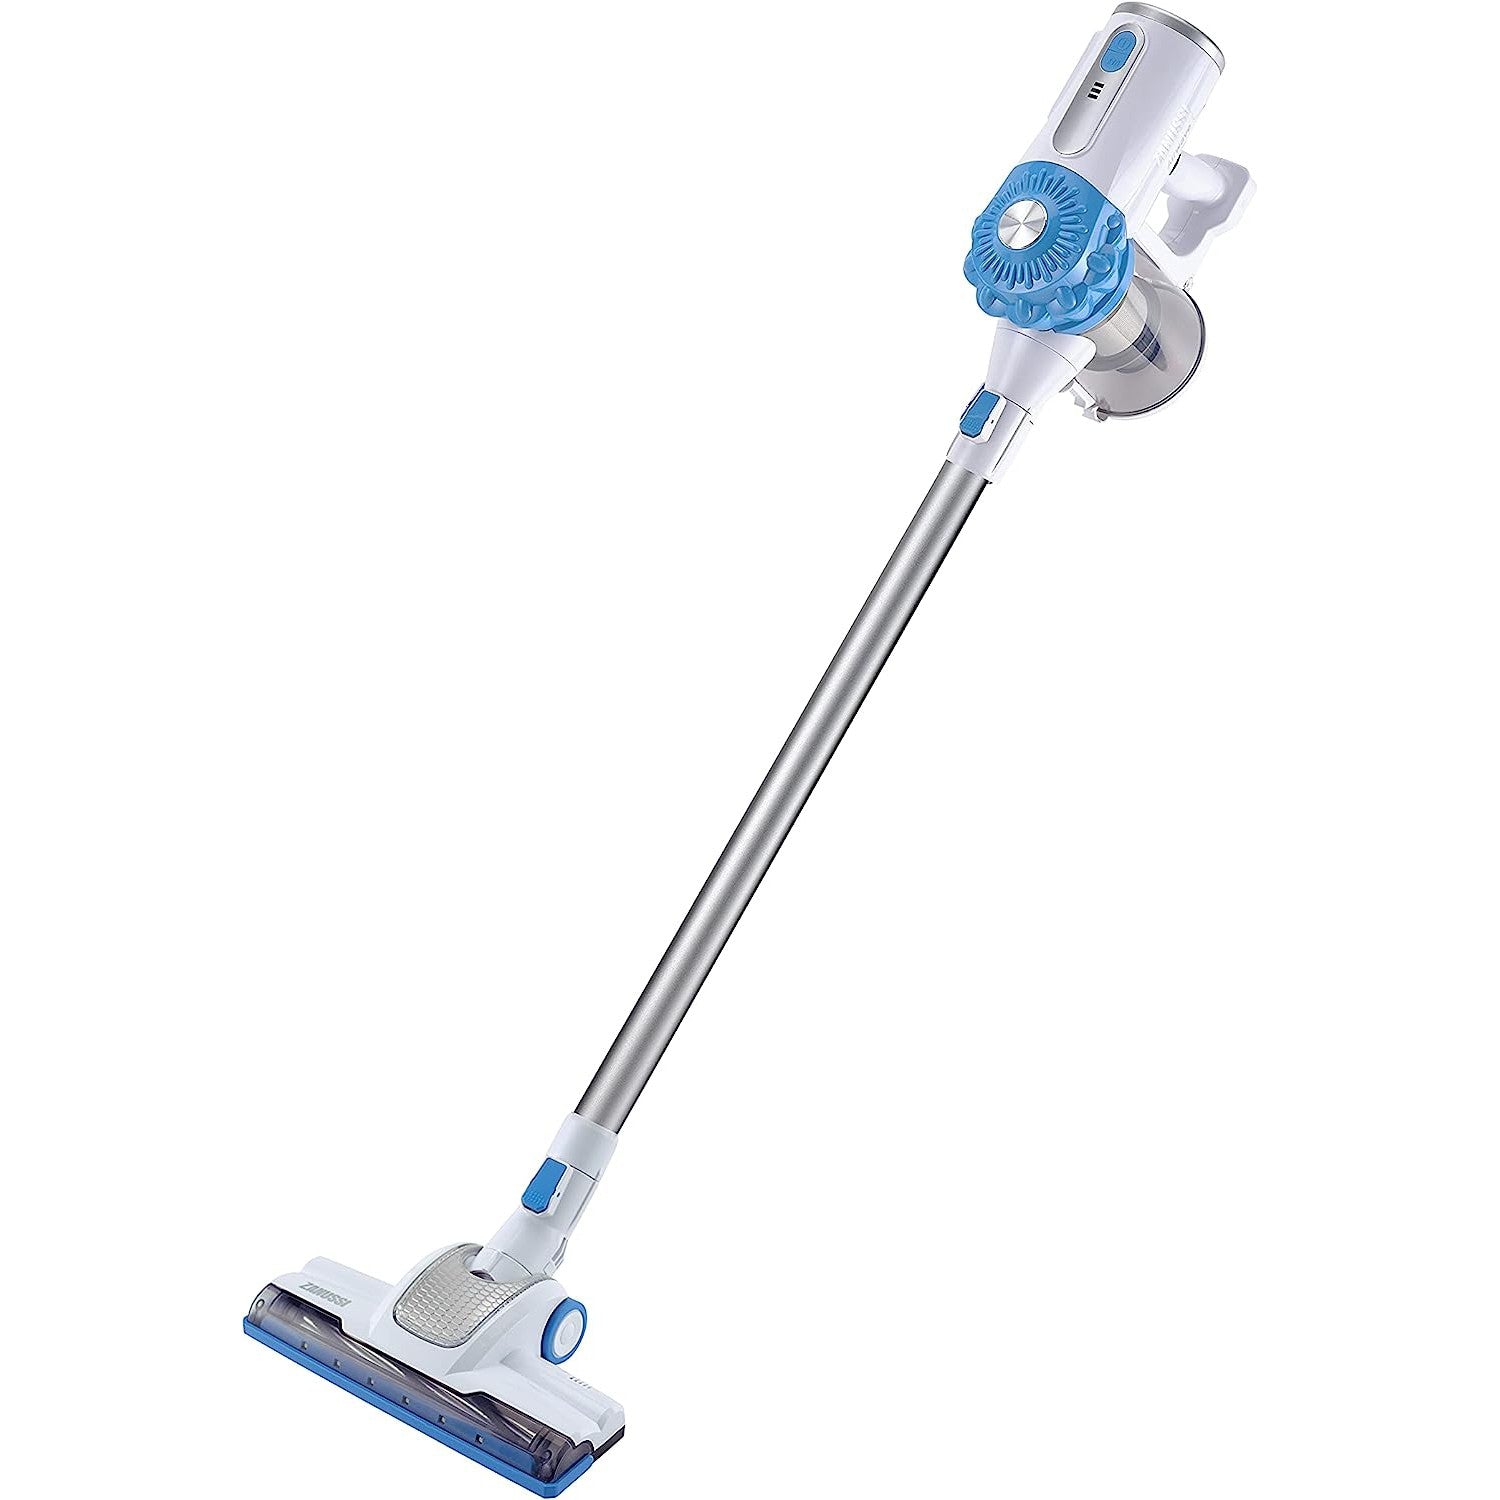 Zanussi Airwave ZHS-32802-BL Cordless Vacuum Cleaner - Blue / White - Refurbished Excellent